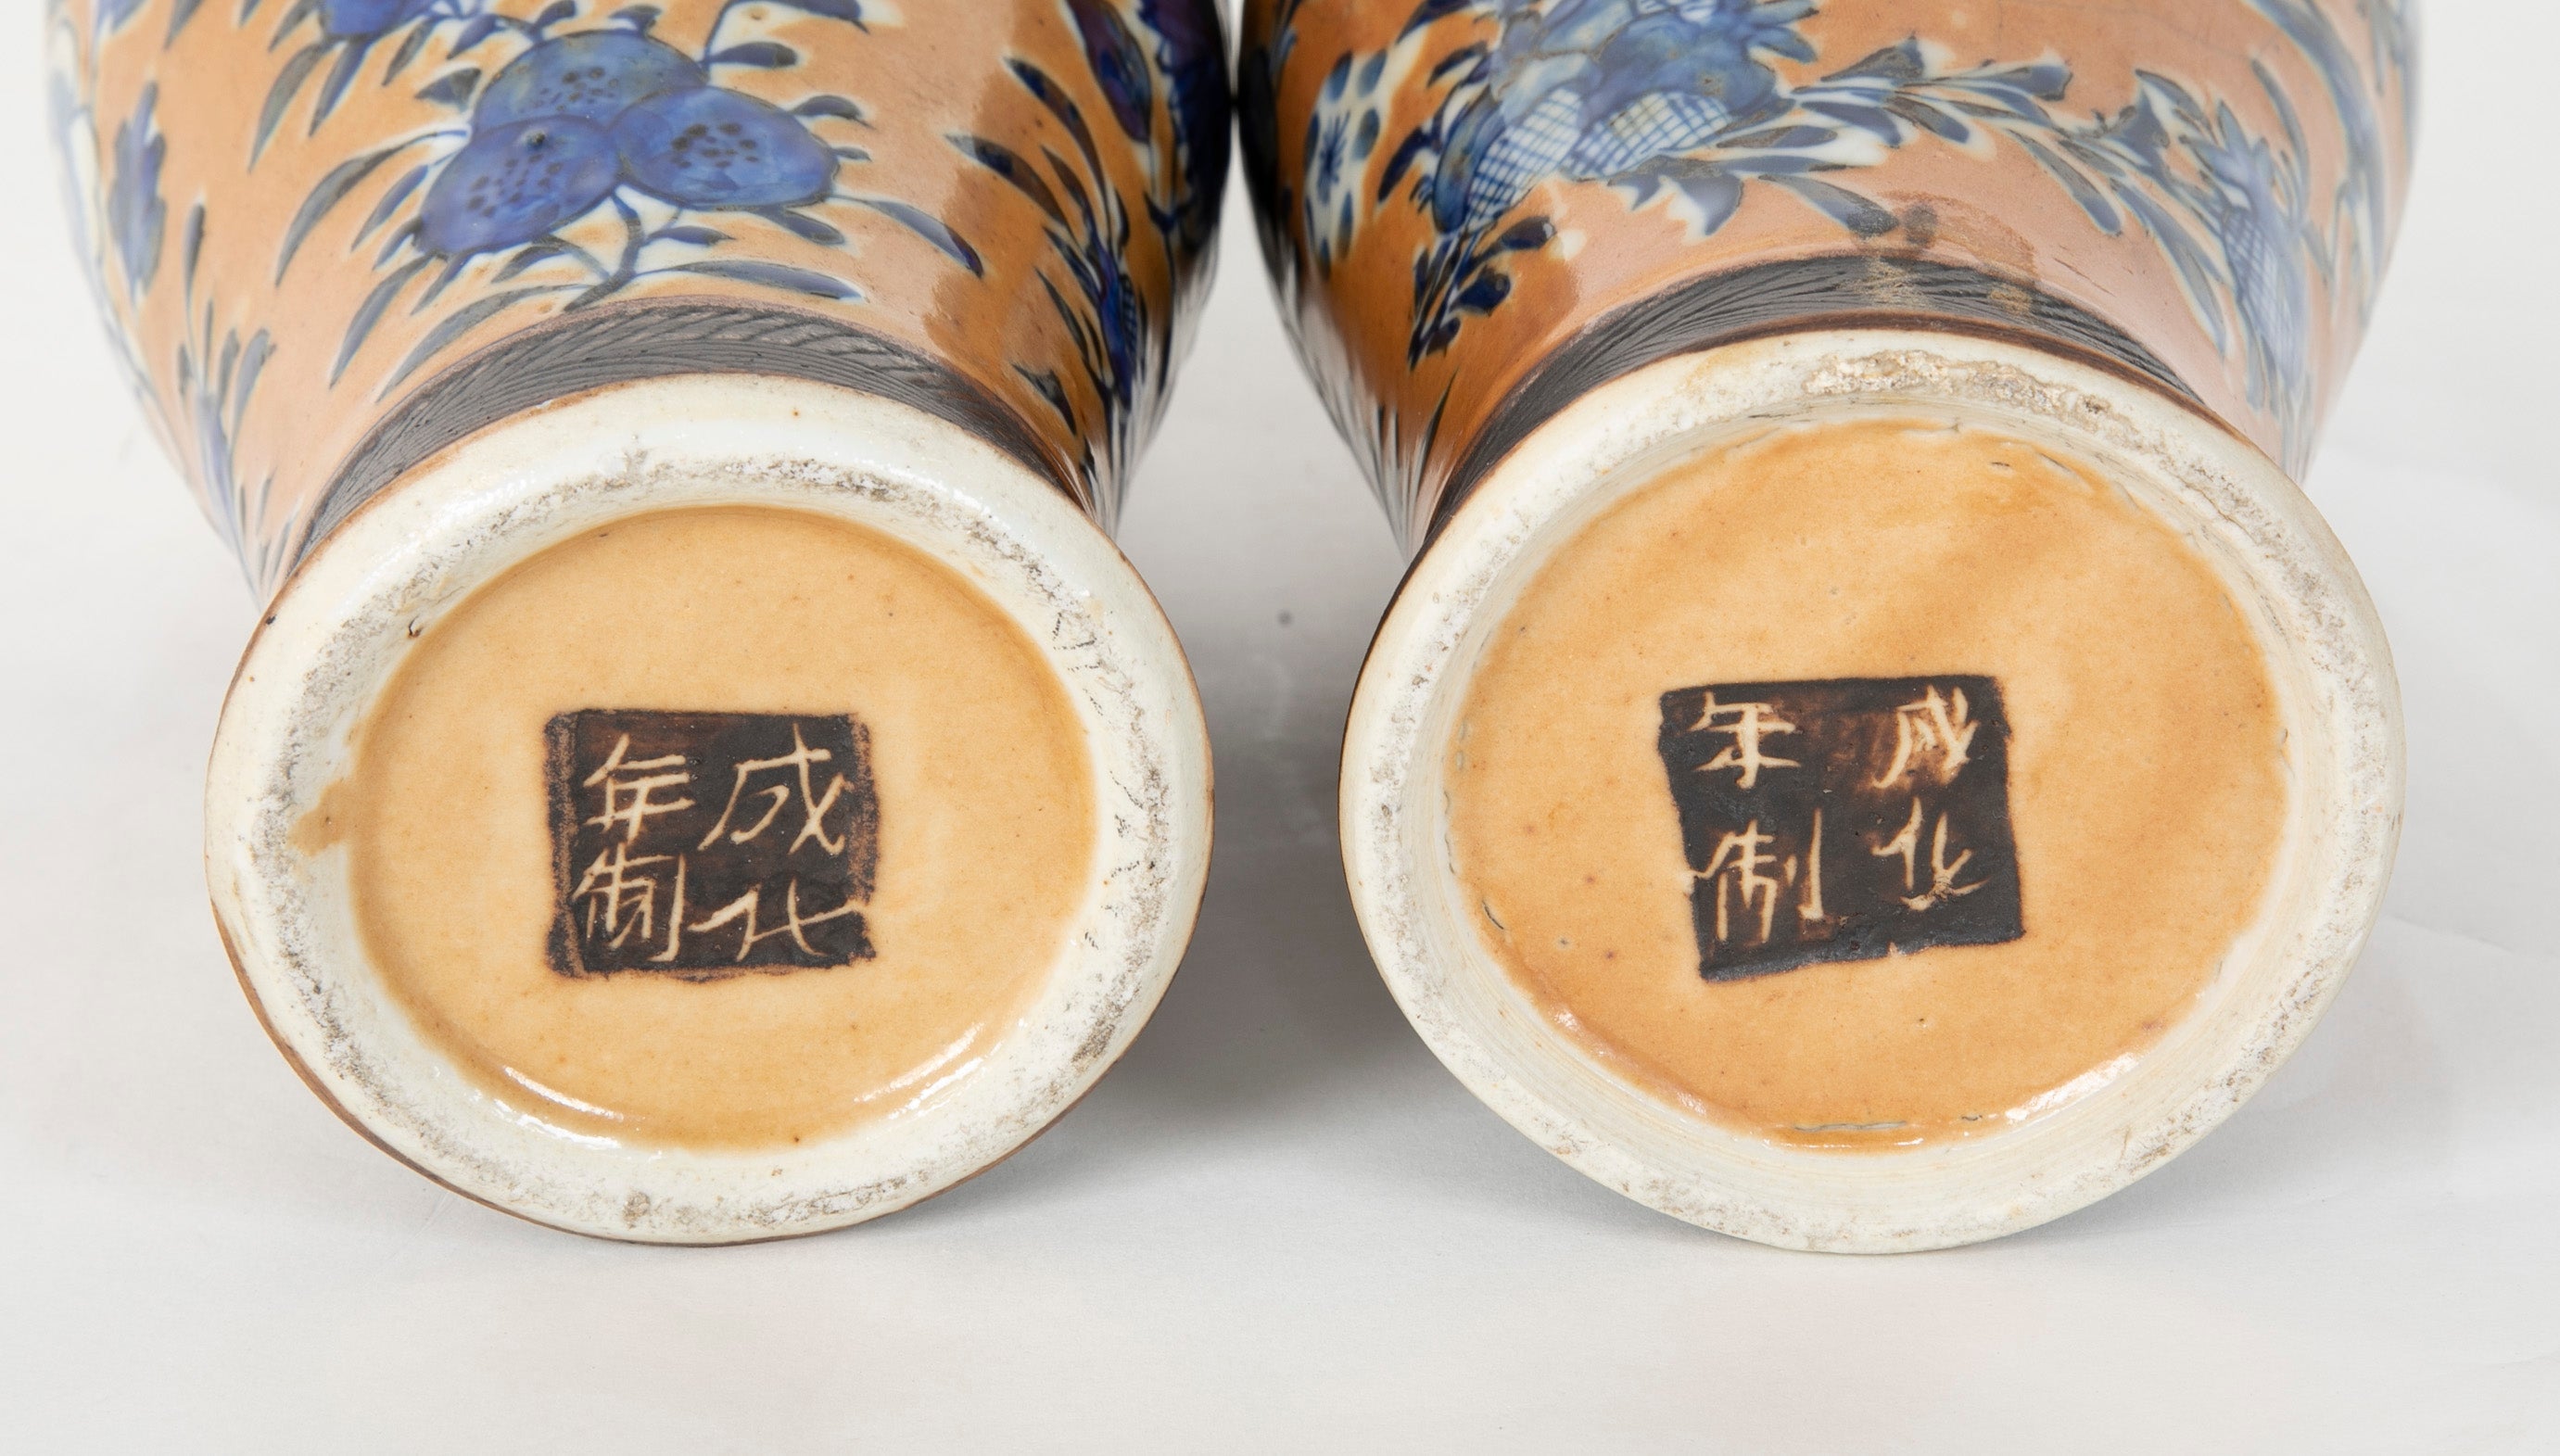 Matched Pair of Chinese Mid-Qing Dynasty Vases